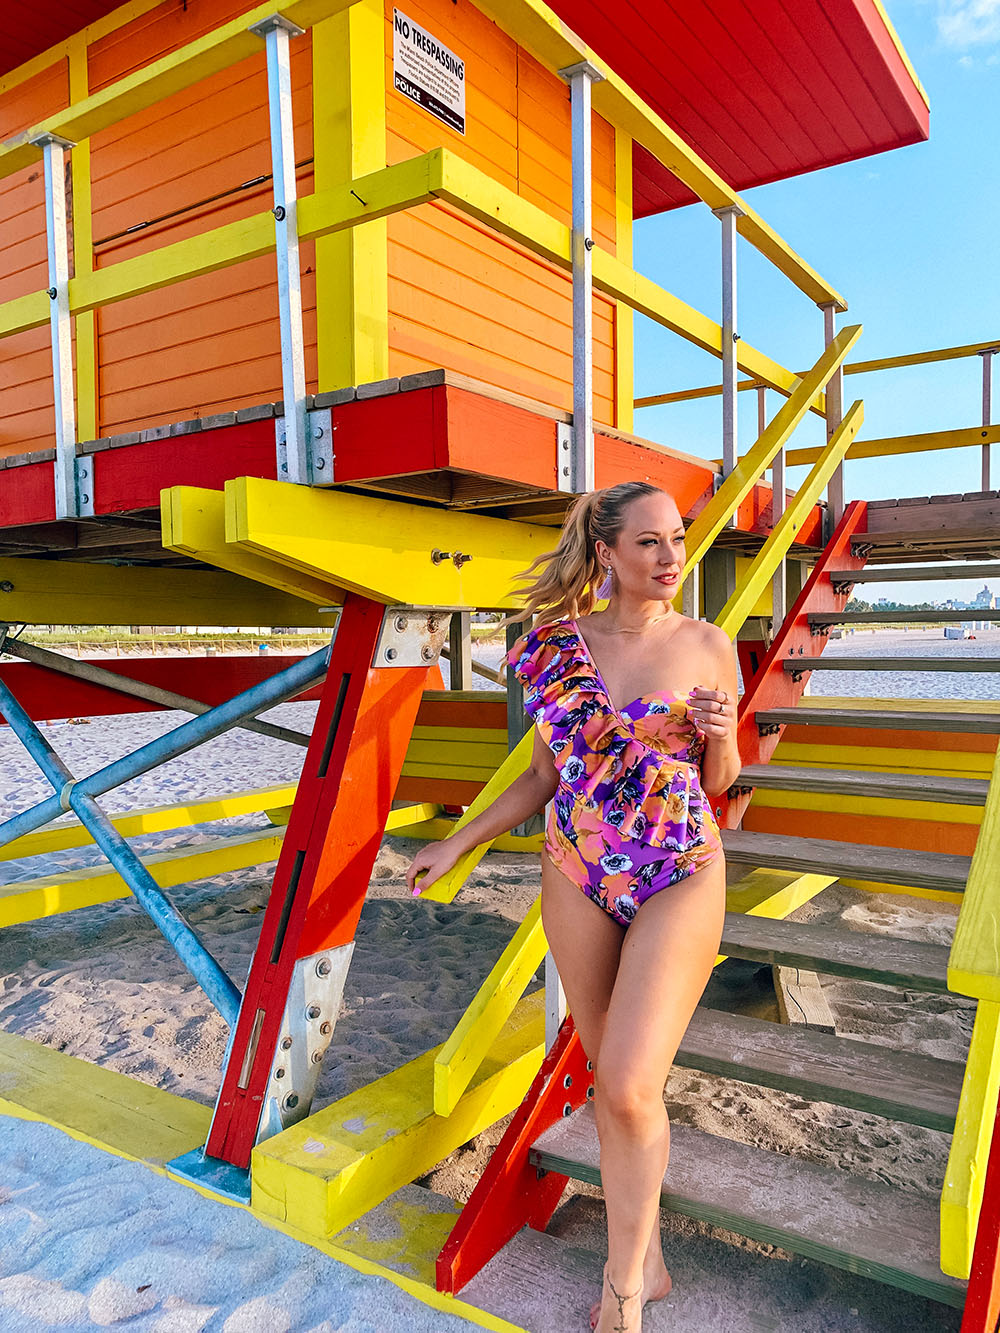 So you've planned a wonderful 3 day trip to Miami and now you're looking for the perfect itinerary for your visit… well, this guide is for you! I’ve put together the ultimate 3 days in Miami itinerary that will have you seeing and experiencing all of Miami’s top sights and attractions. From South Beach & Ocean Drive to Little Havana & Wynwood, you don’t want to miss this guide to the perfect long weekend in Miami.